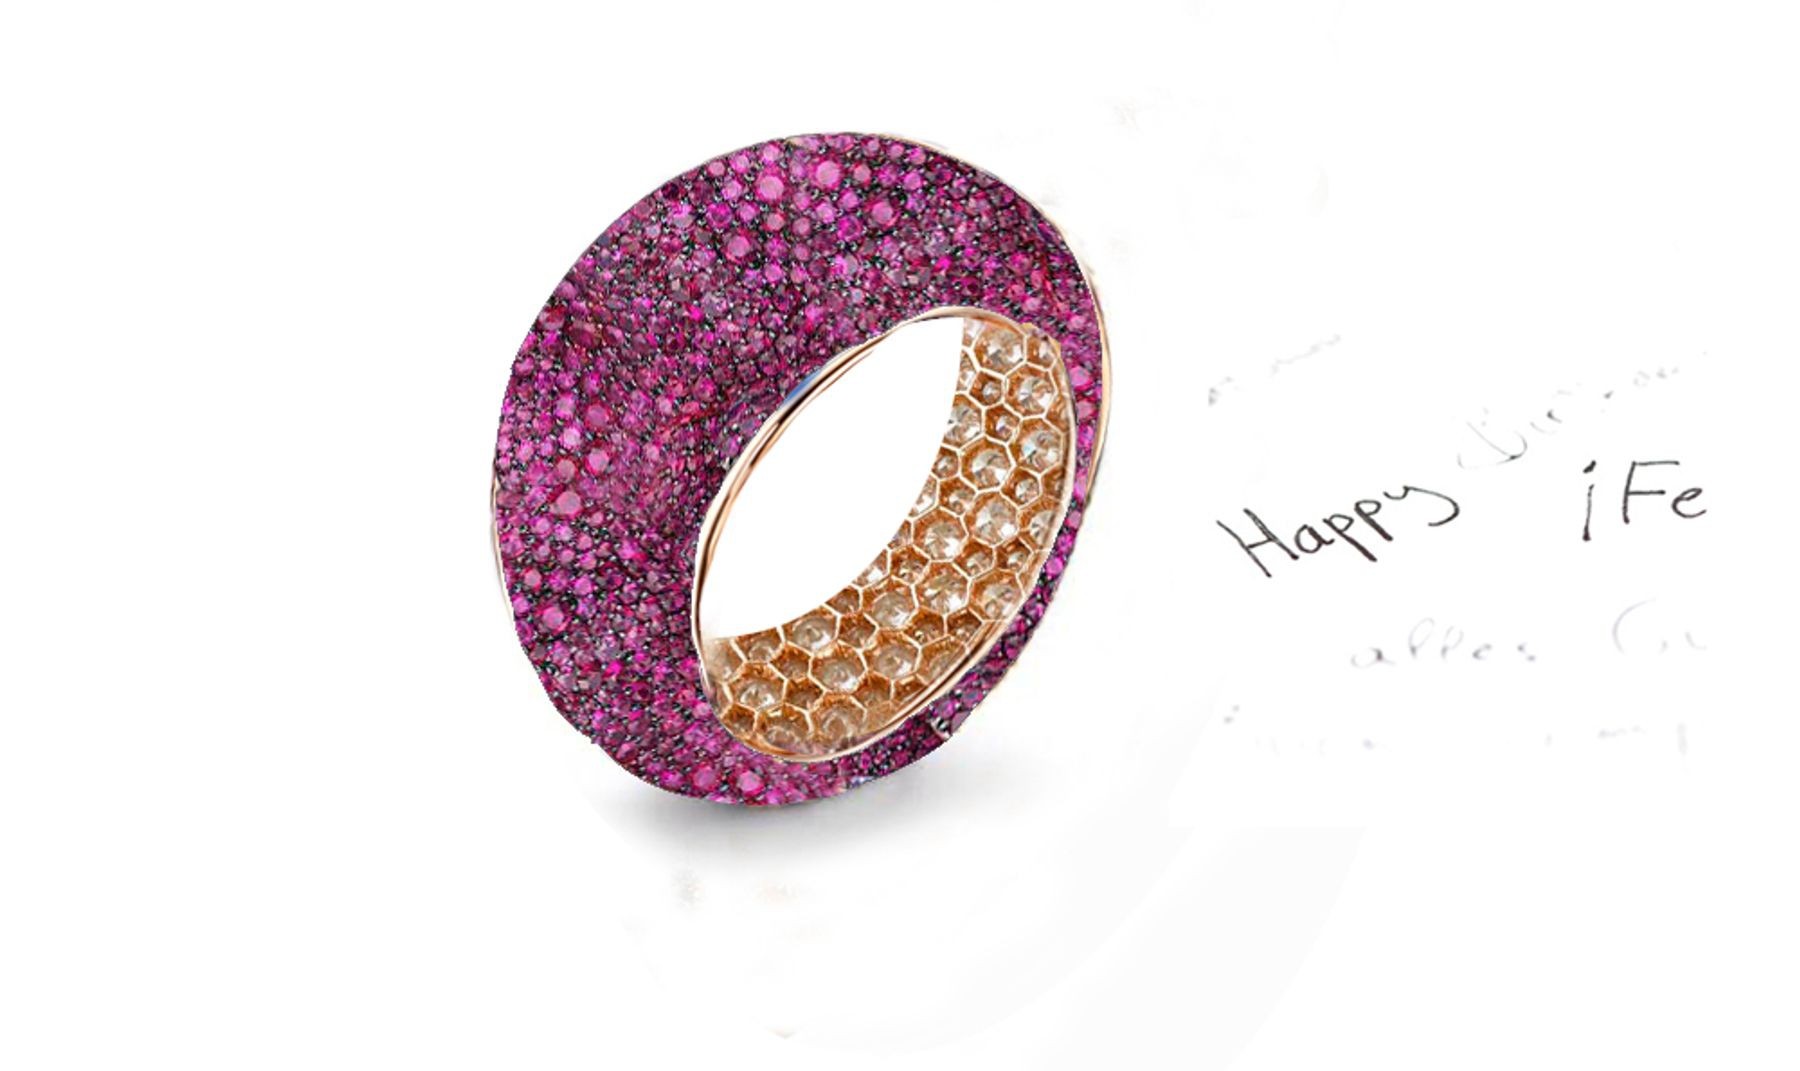 Enjoy The Magic of Delicate Eternity Rings Featuring Diamonds & Rubies, Emeralds & Sapphires